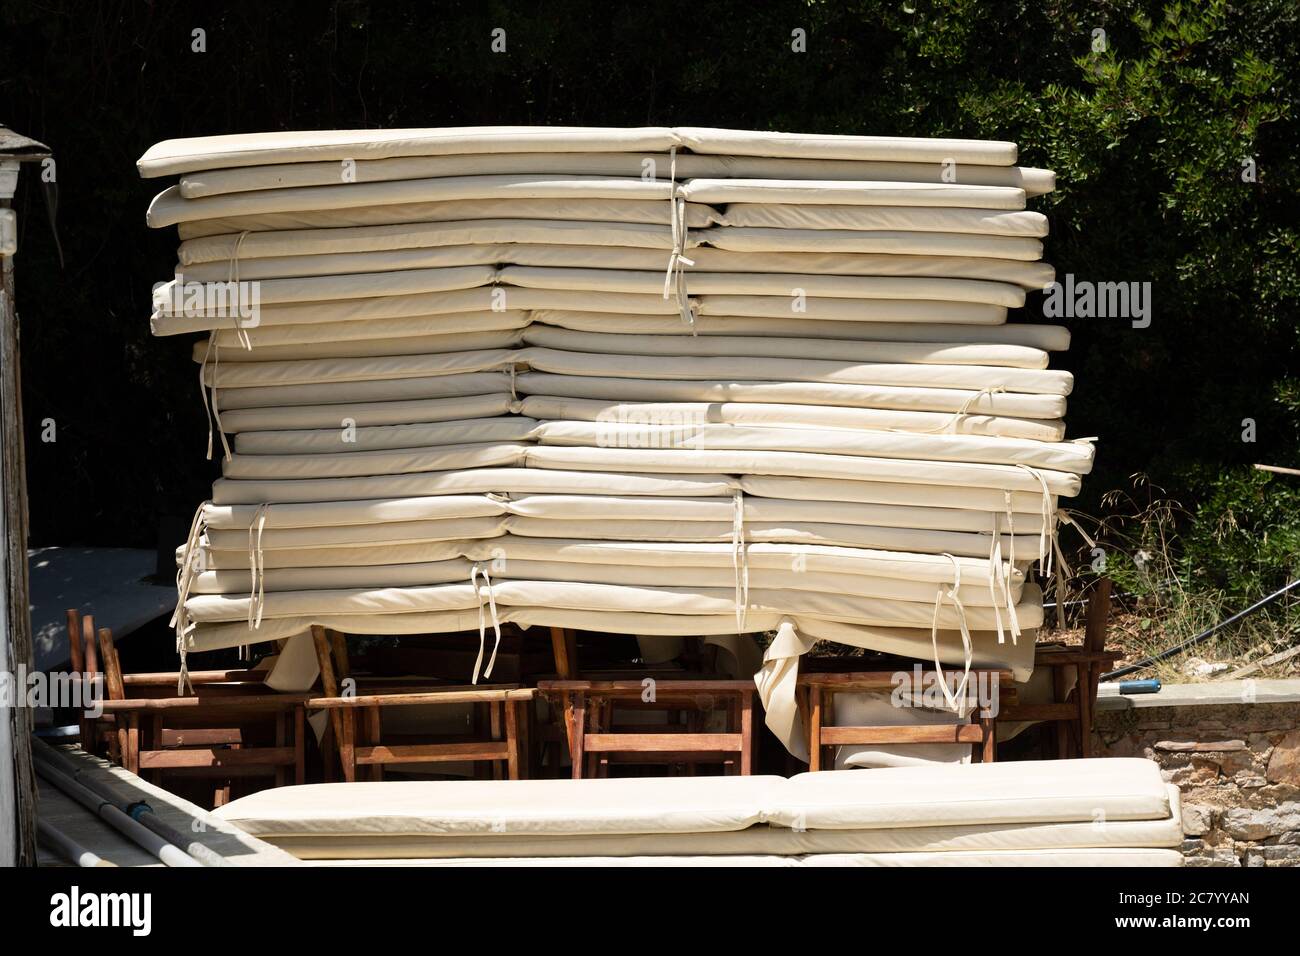 A high pile of beige mattresses for sunbeds is waiting to be used by summer tourists. Stock Photo